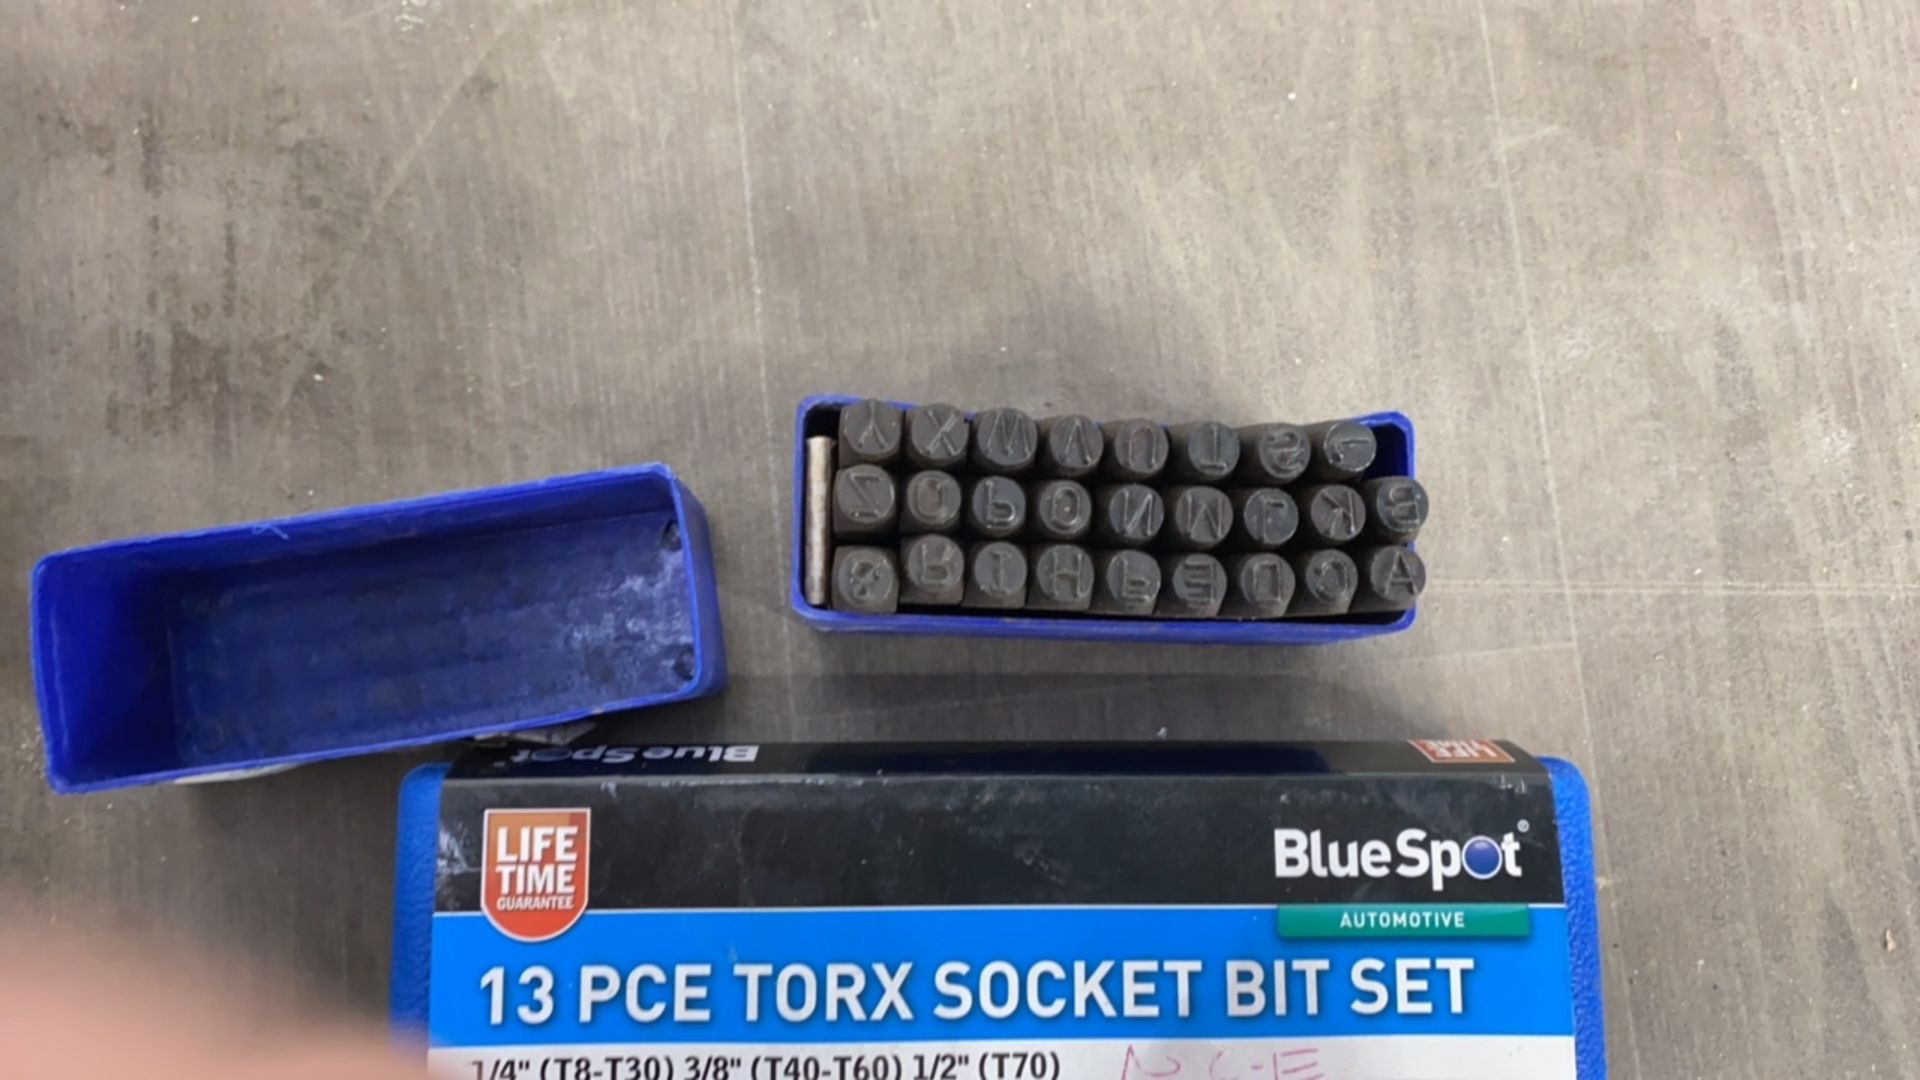 13 Pce Socket Bit Set, Letter Punches And Clarke Lights With Tripod - Image 4 of 4